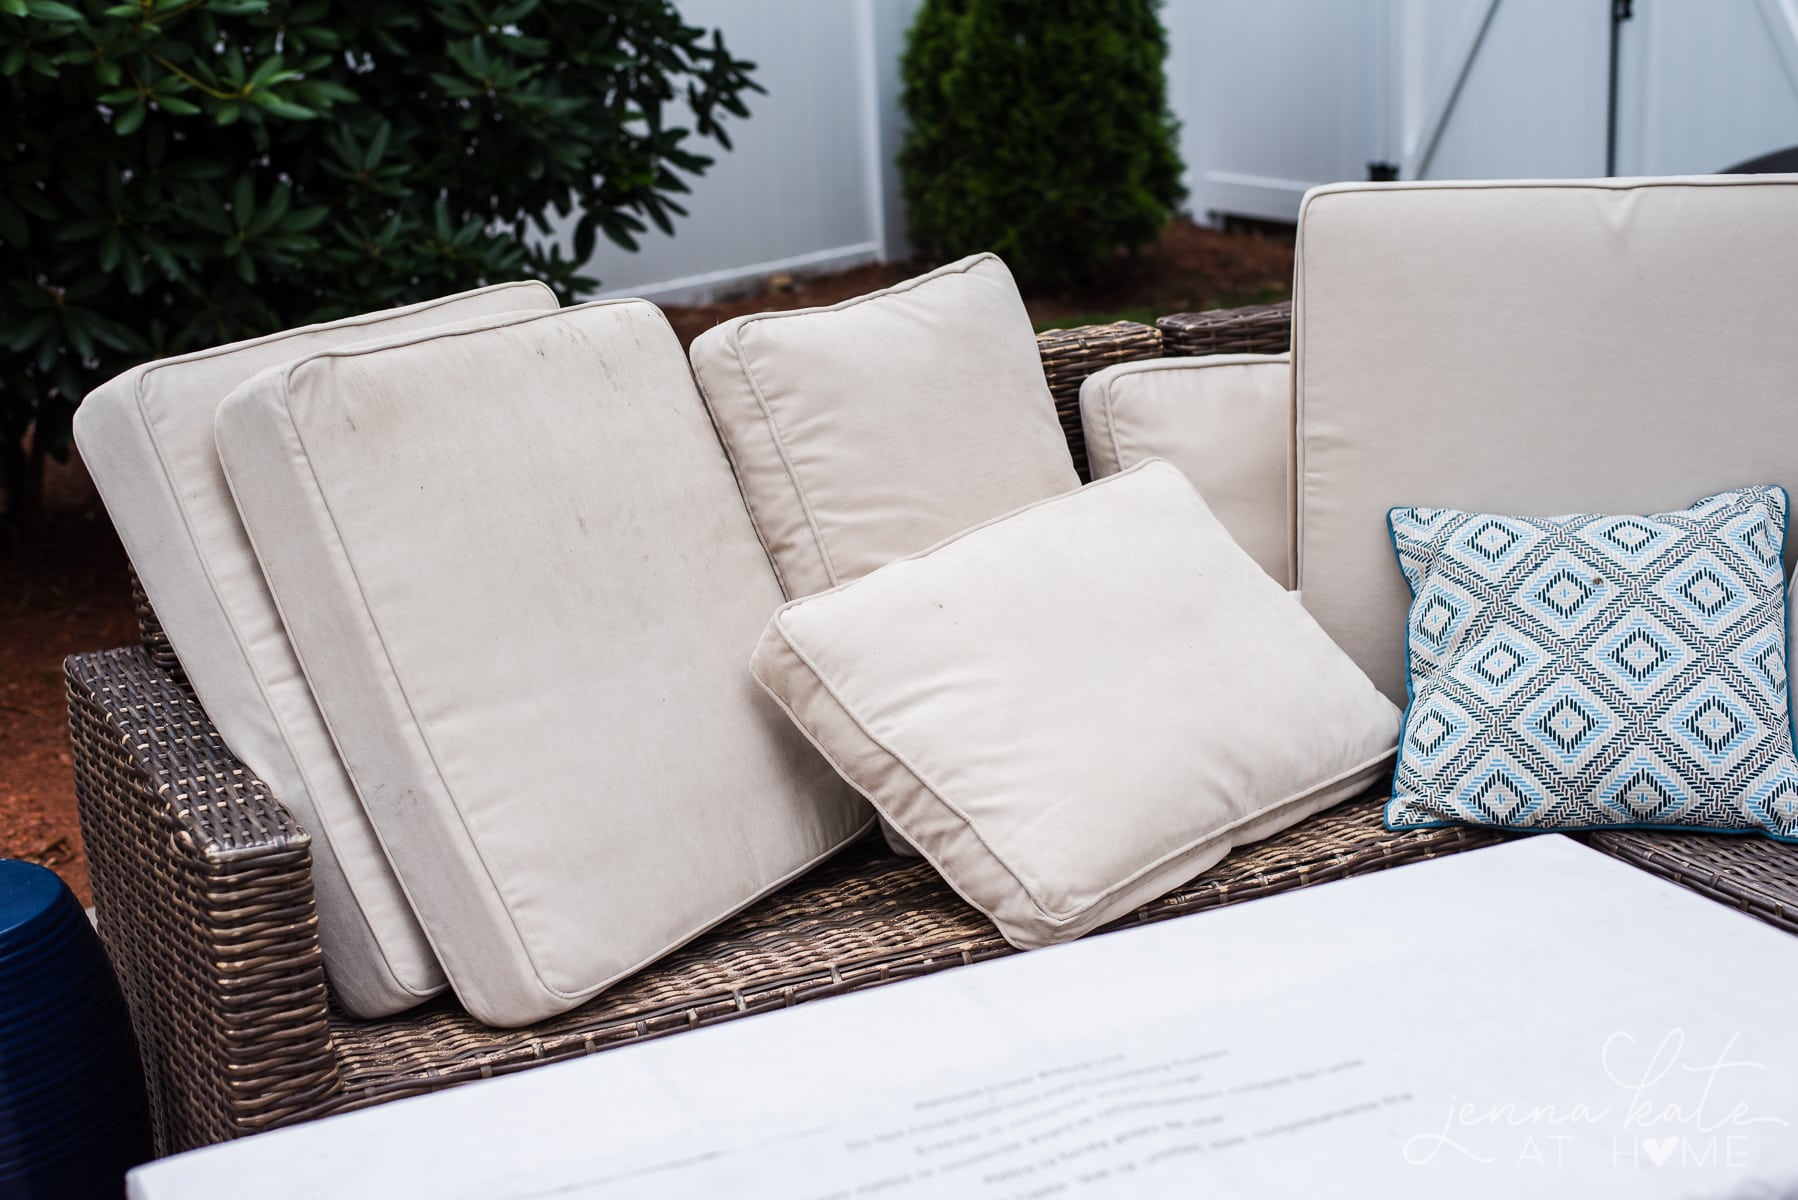 How To Clean Outdoor Cushions Jenna, How To Wash Removable Outdoor Cushion Covers